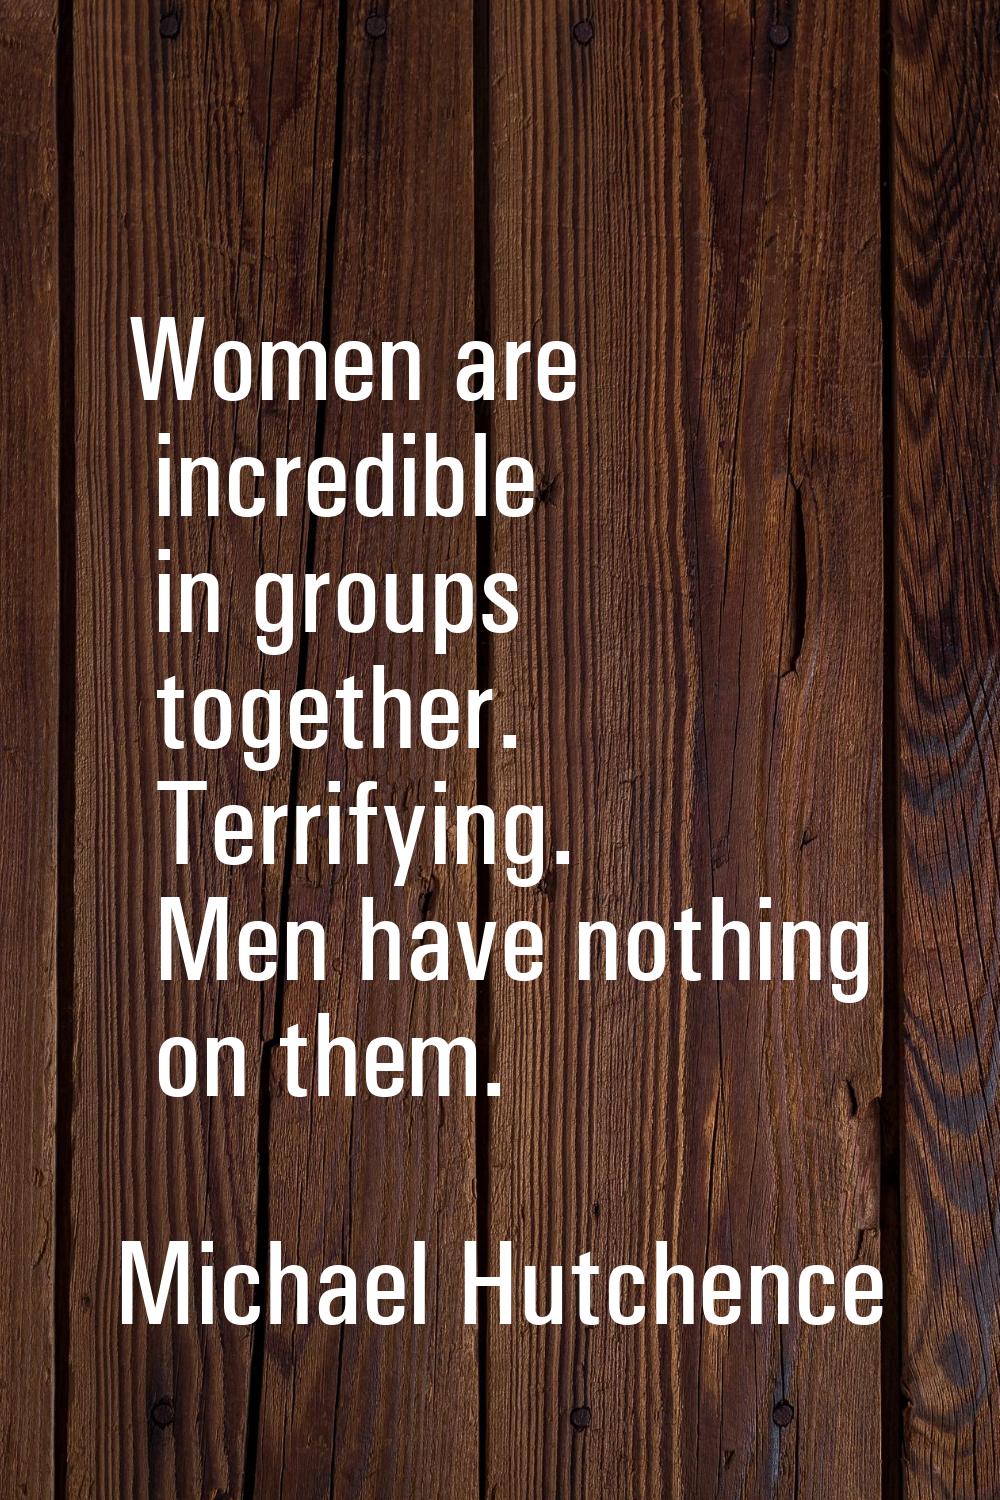 Women are incredible in groups together. Terrifying. Men have nothing on them.